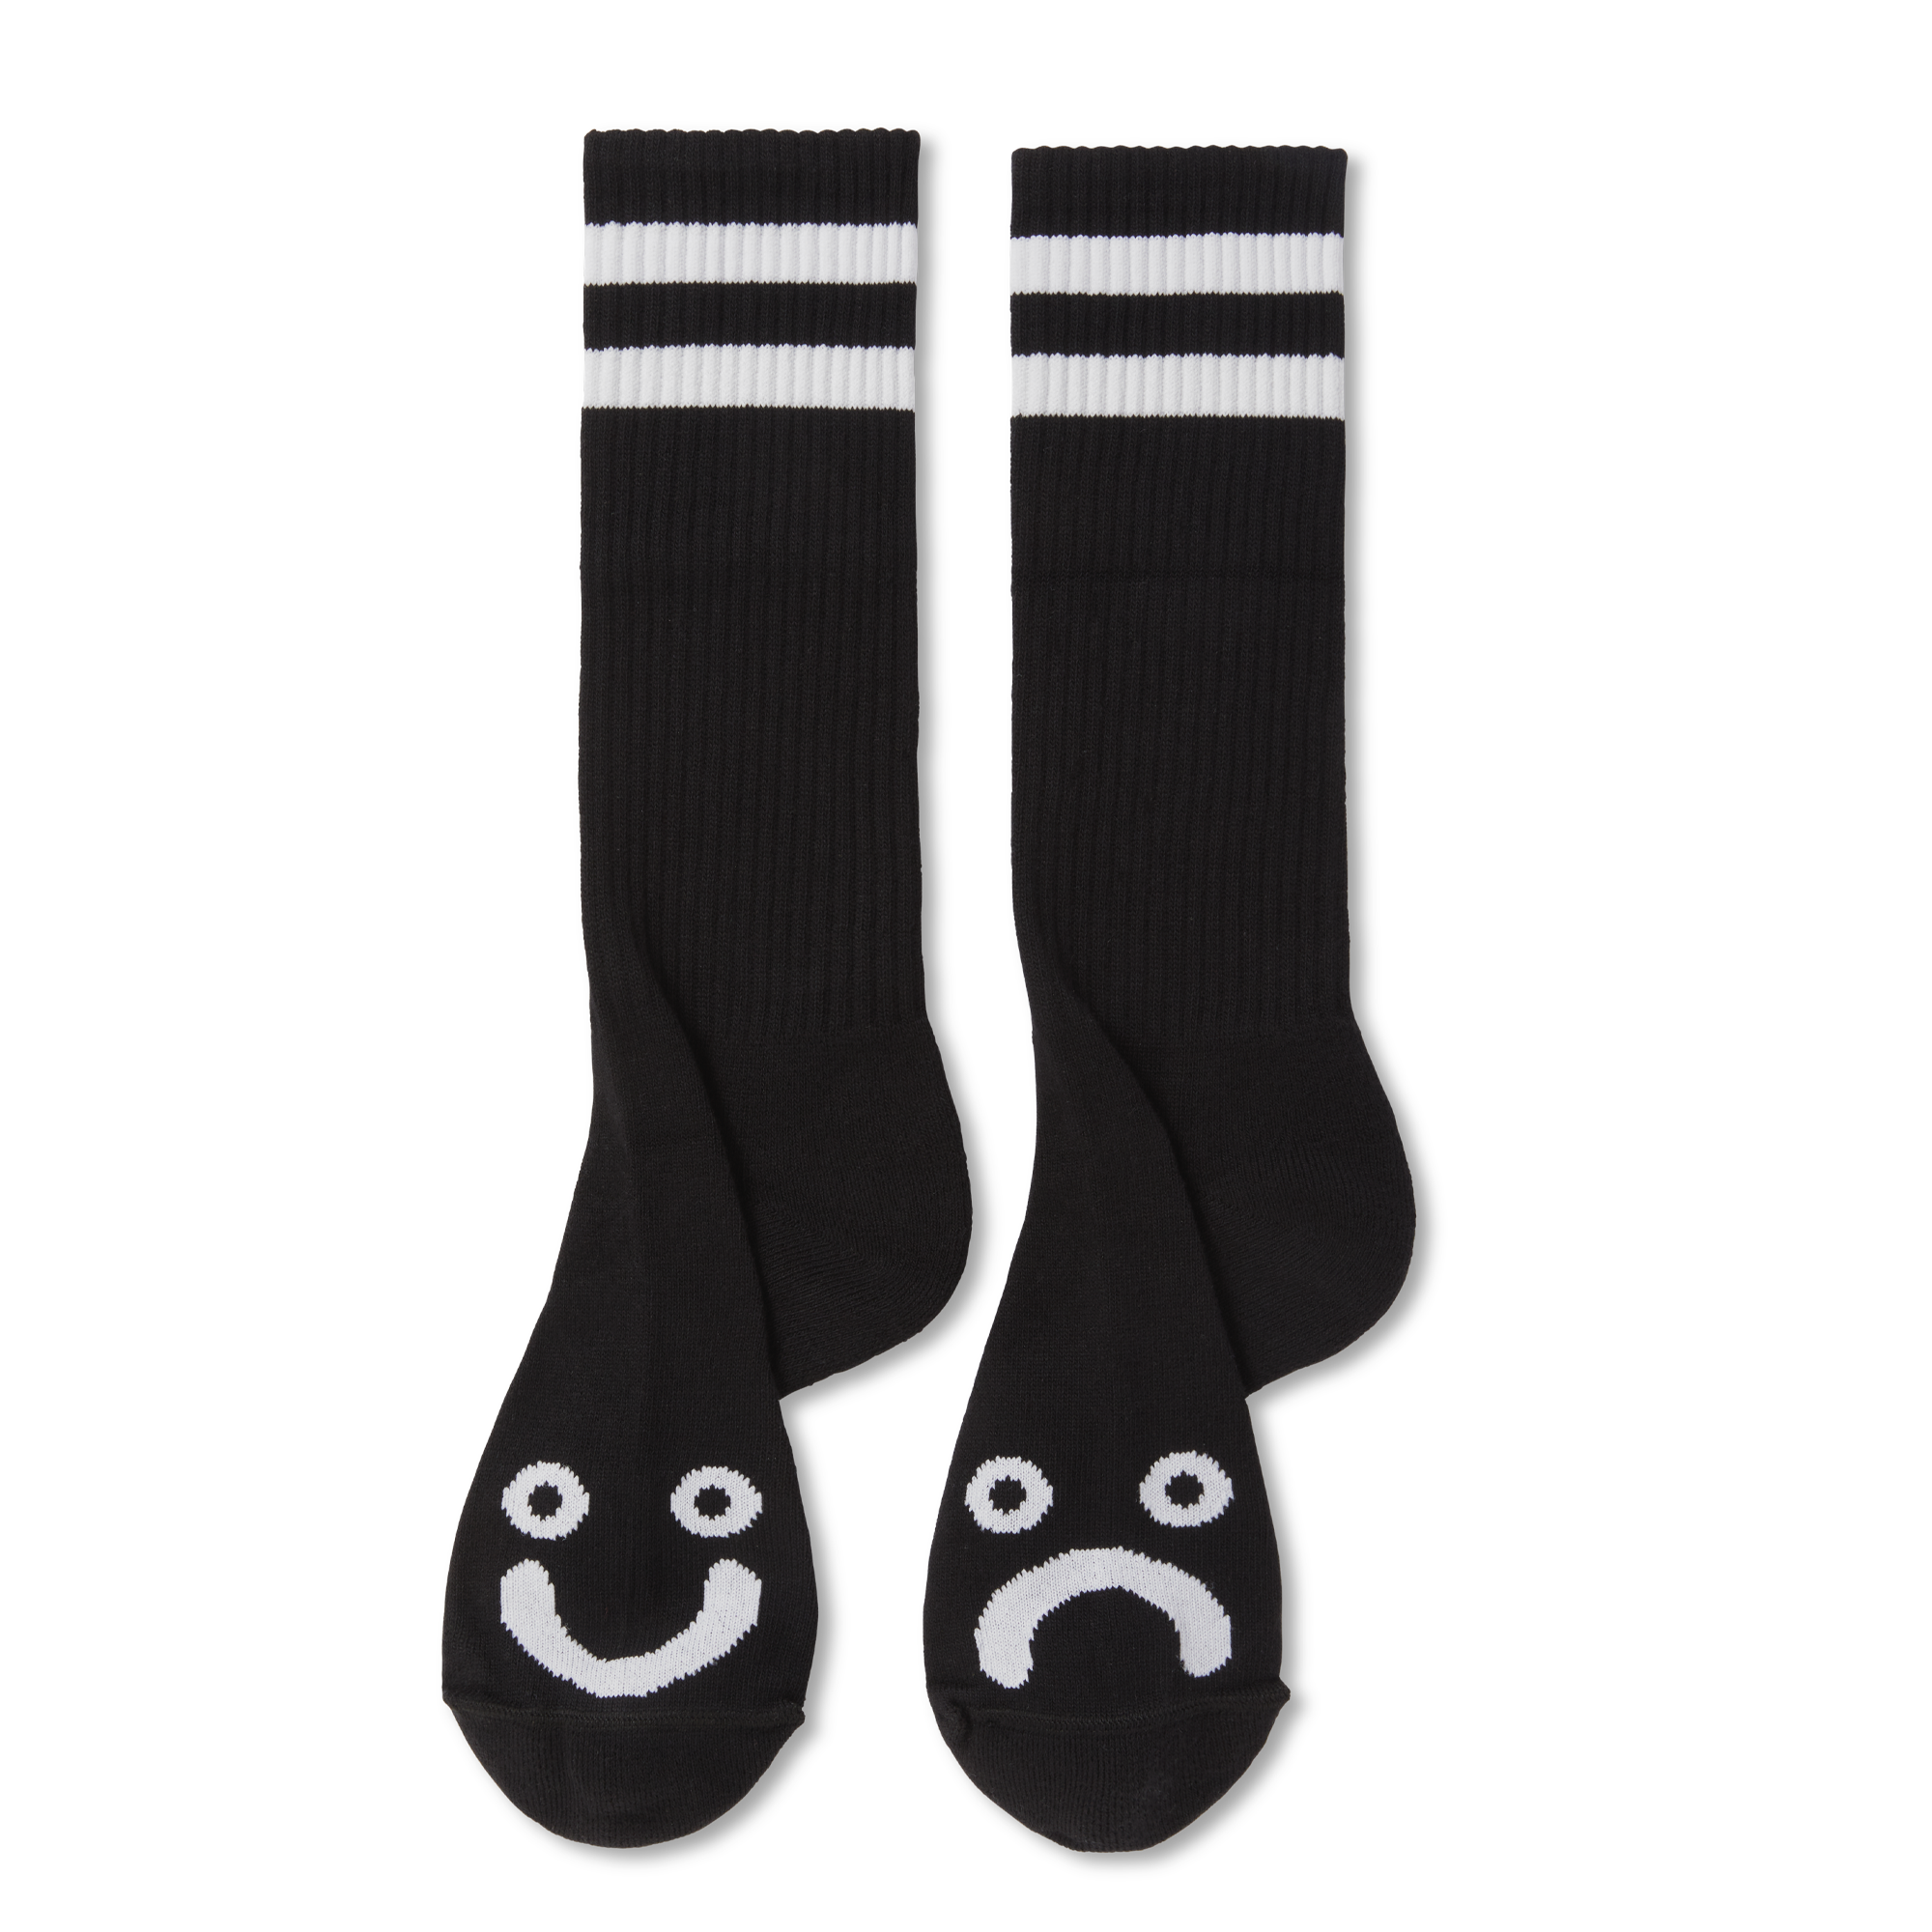 Black polar rib socks with white stripes and smiling and frowning face logos. Free delivery on items over £50